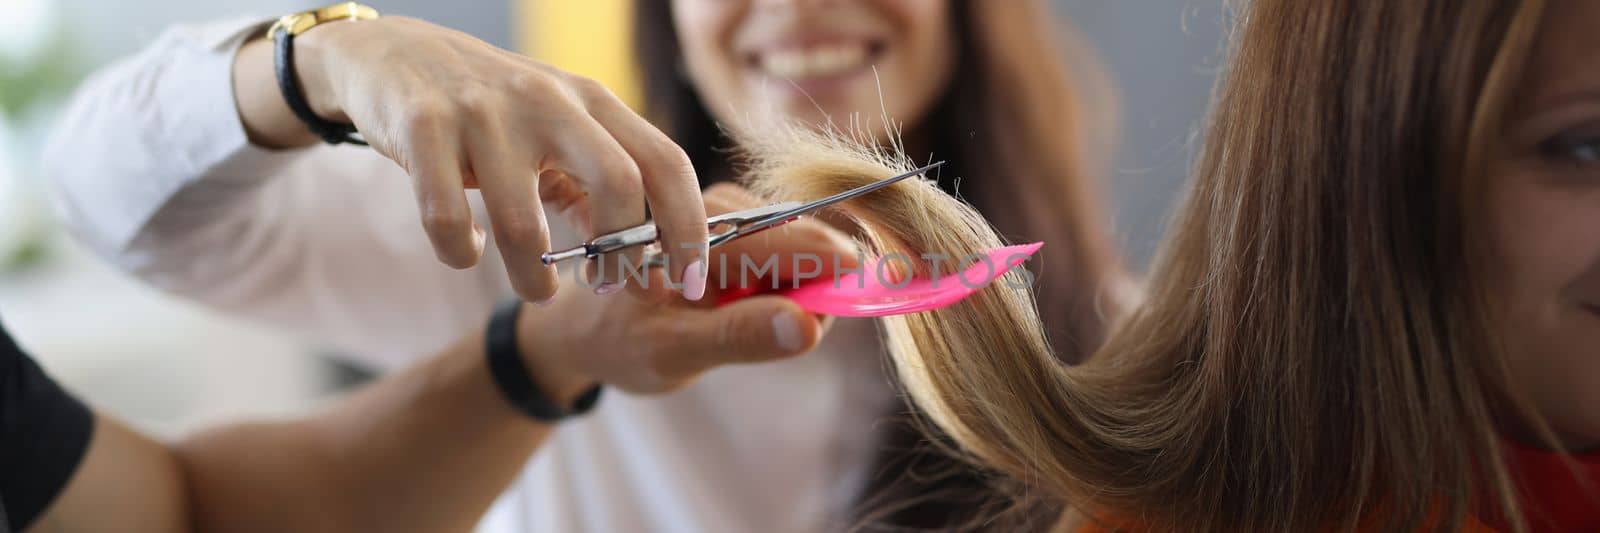 Student in hairdressing is learning how to cut hair. Training profession hairdresser concept